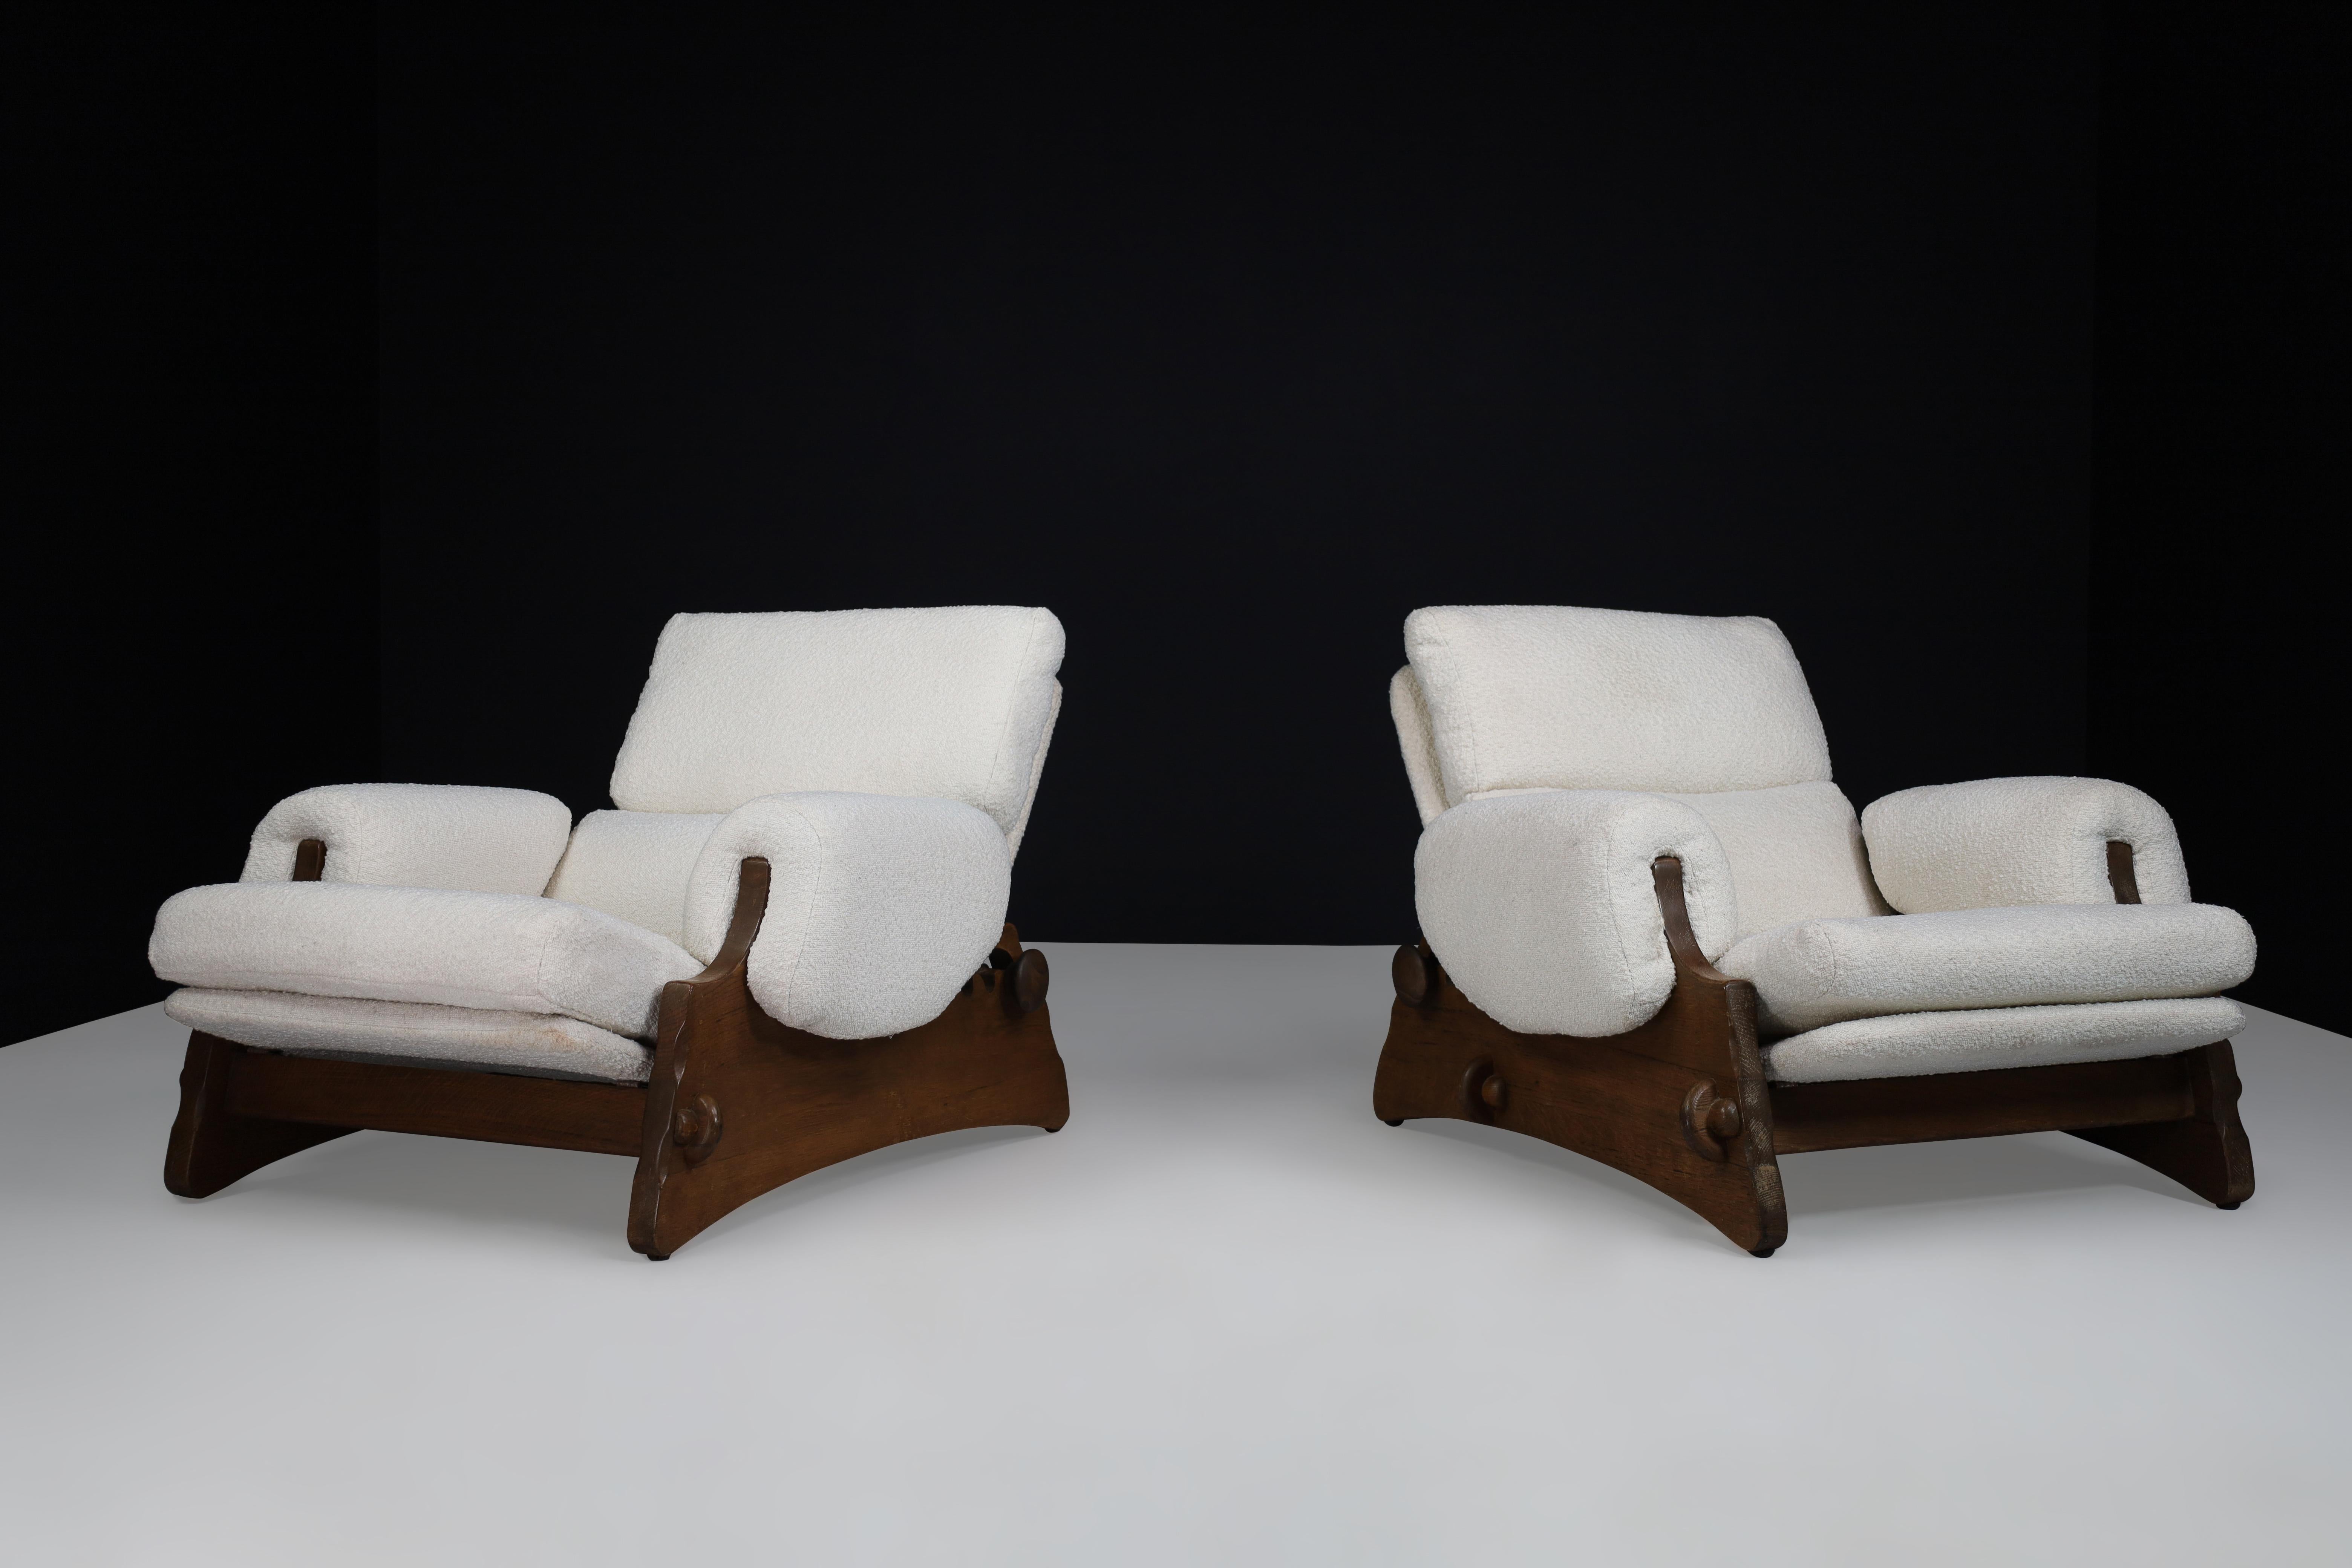 Mid-Century Modern XL Brutalist Lounge Chairs in Oak and Bouclé, Spain 1960s For Sale 8